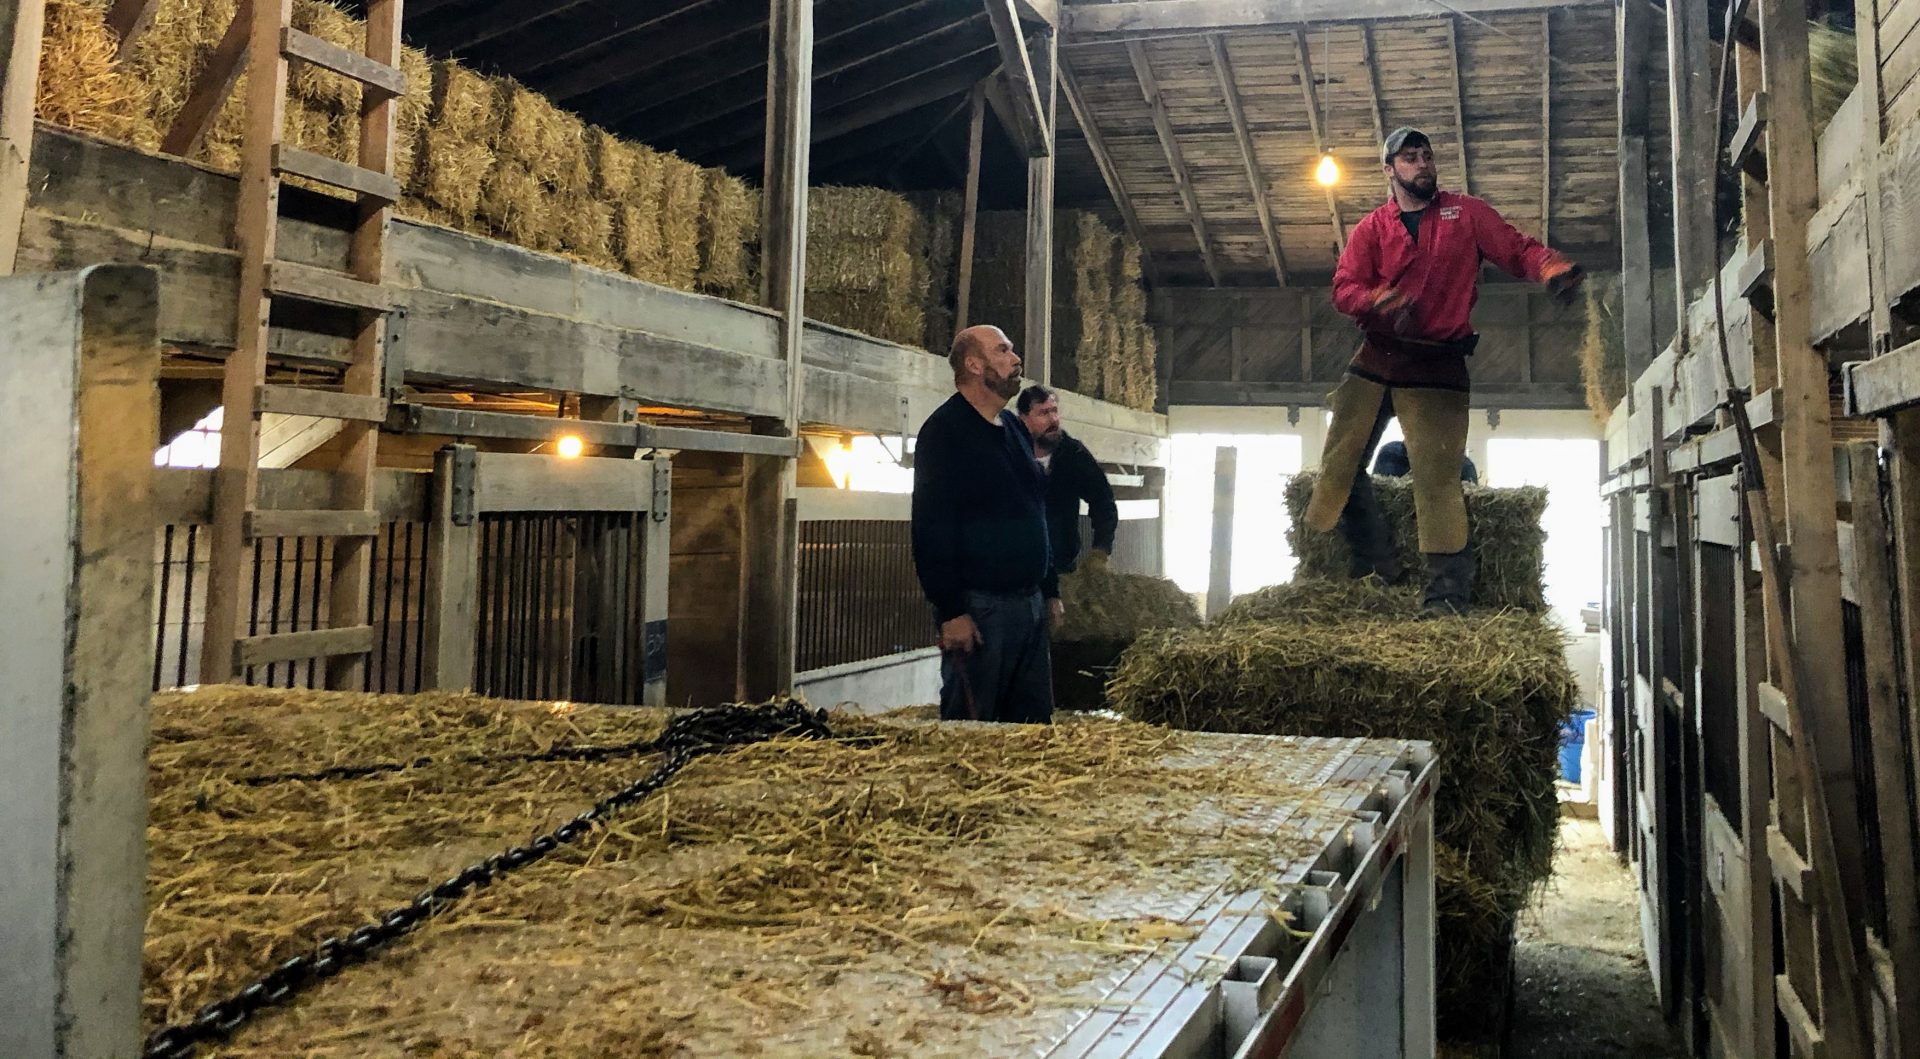 Workers unload hay at Hanover Shoe Farms on Feb. 11, 2020